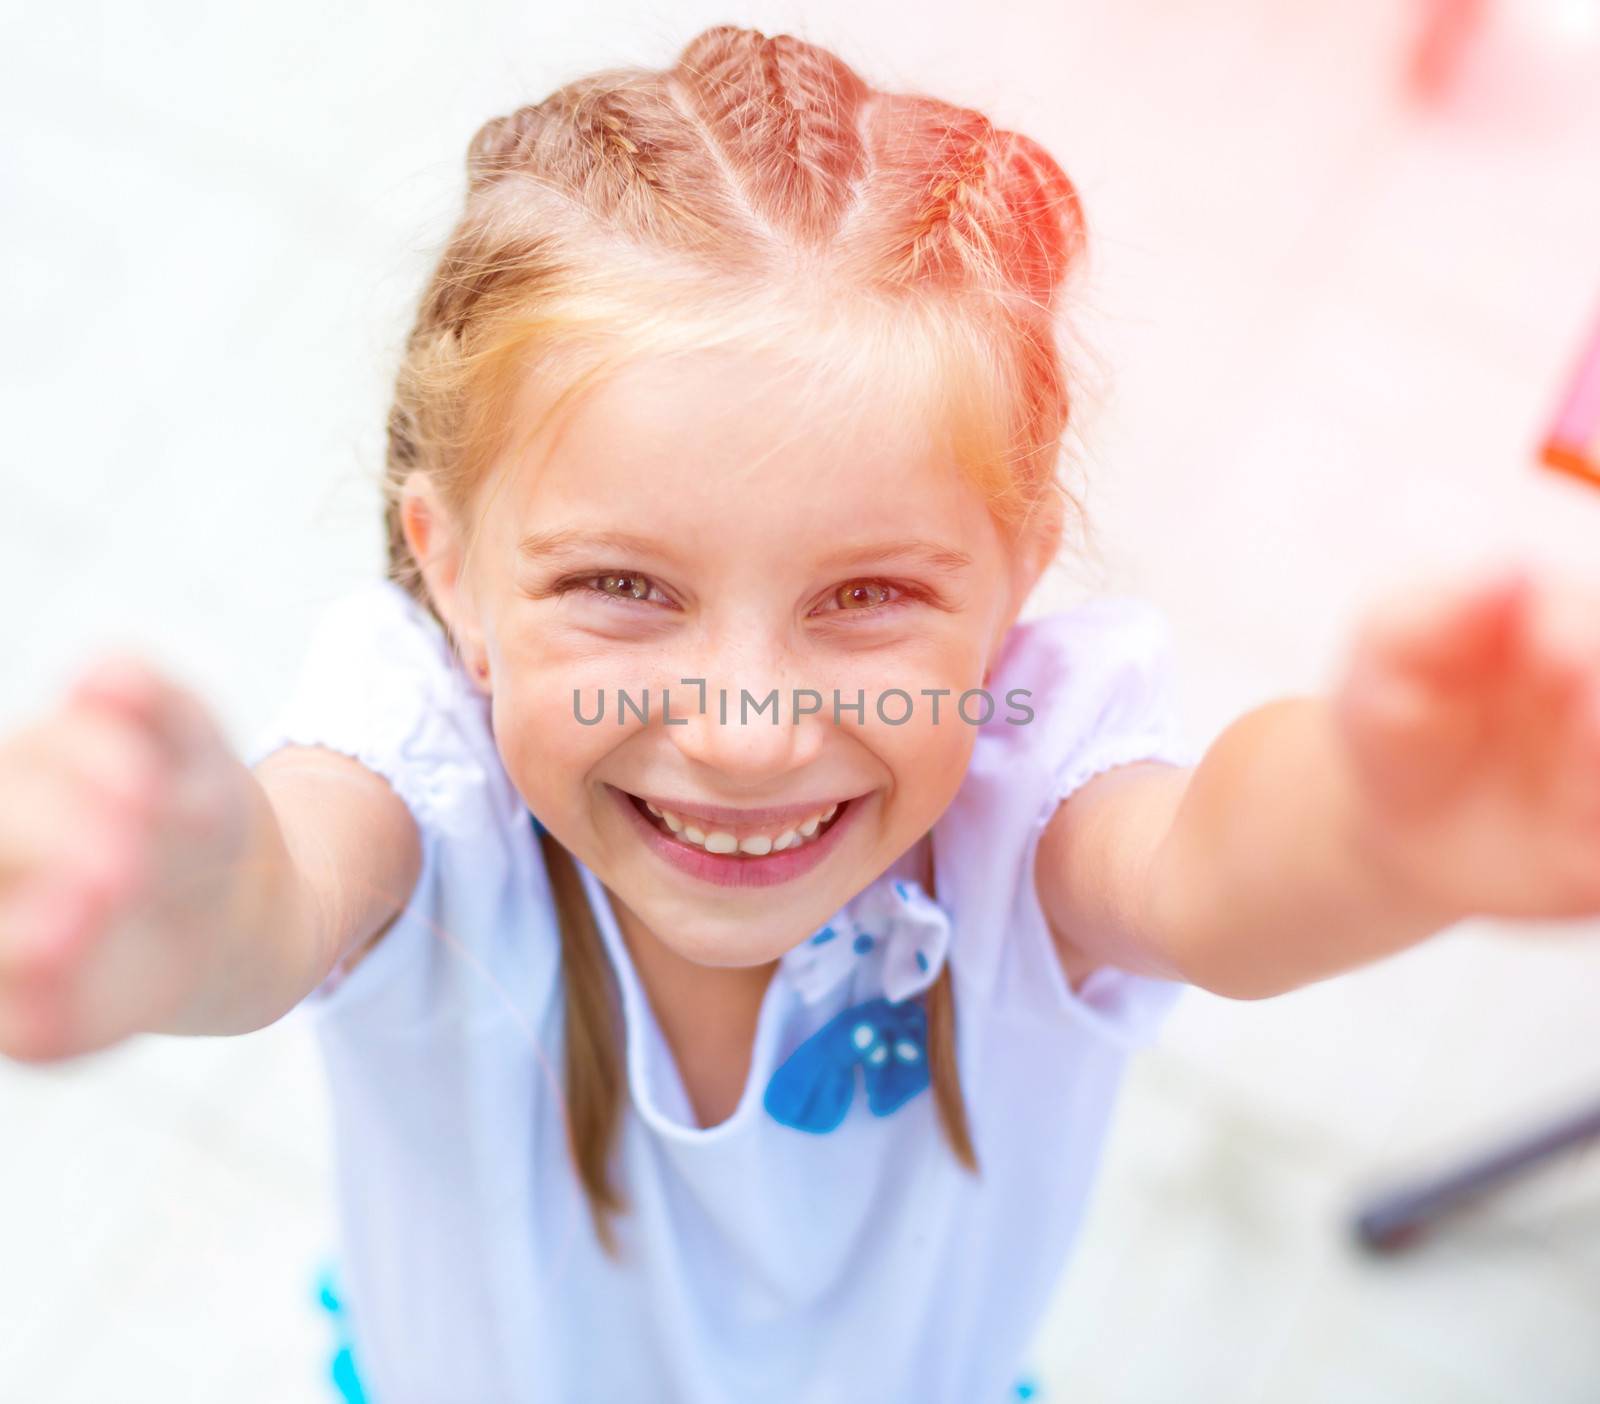 cute little girl smiling in a park close-up